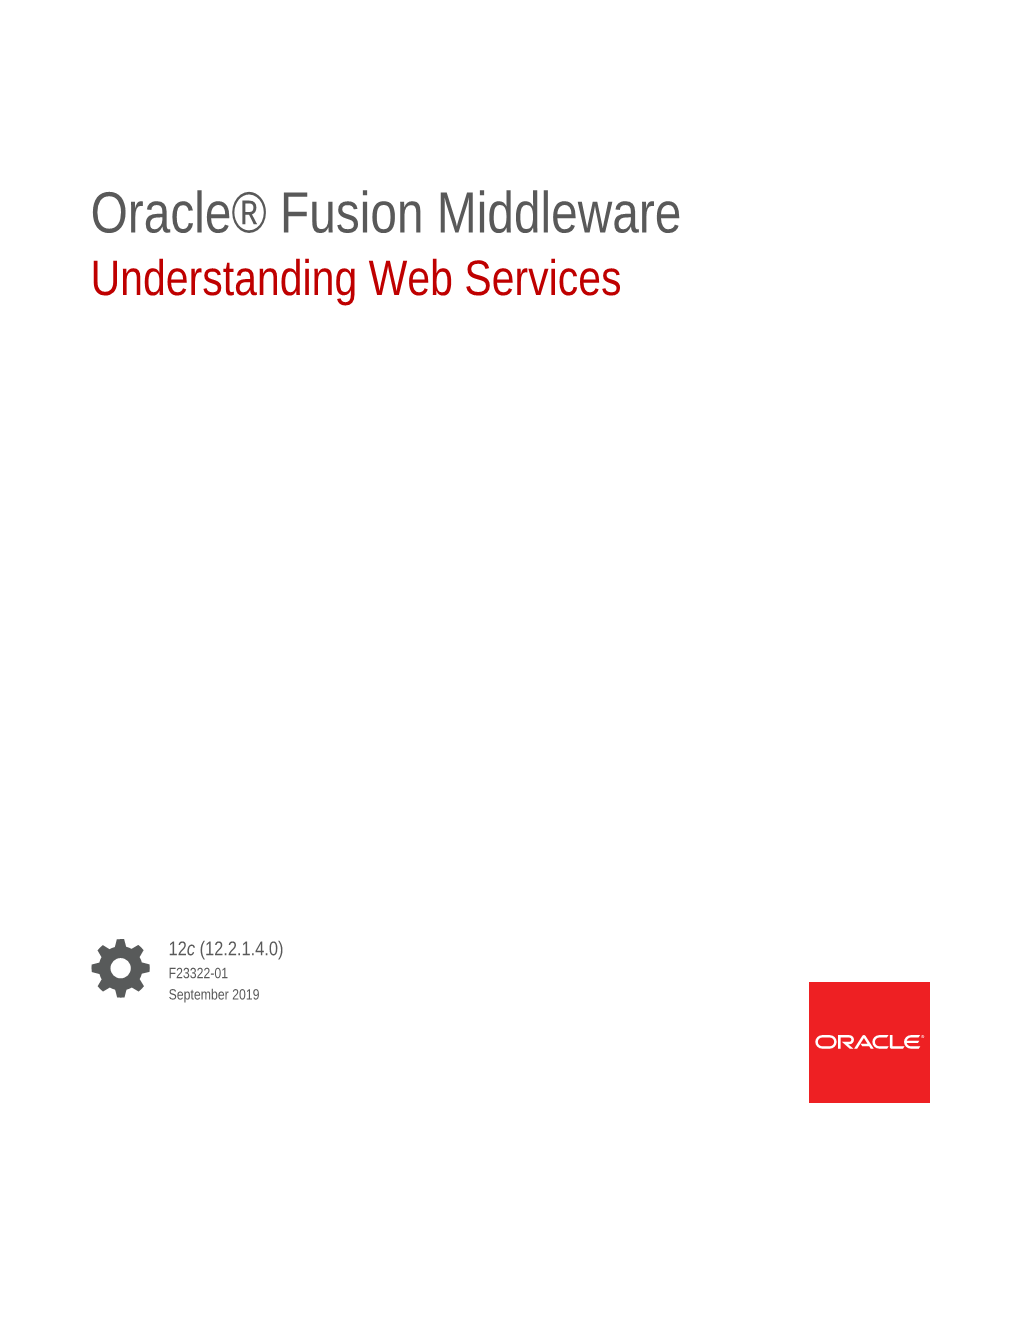 Oracle® Fusion Middleware Understanding Web Services